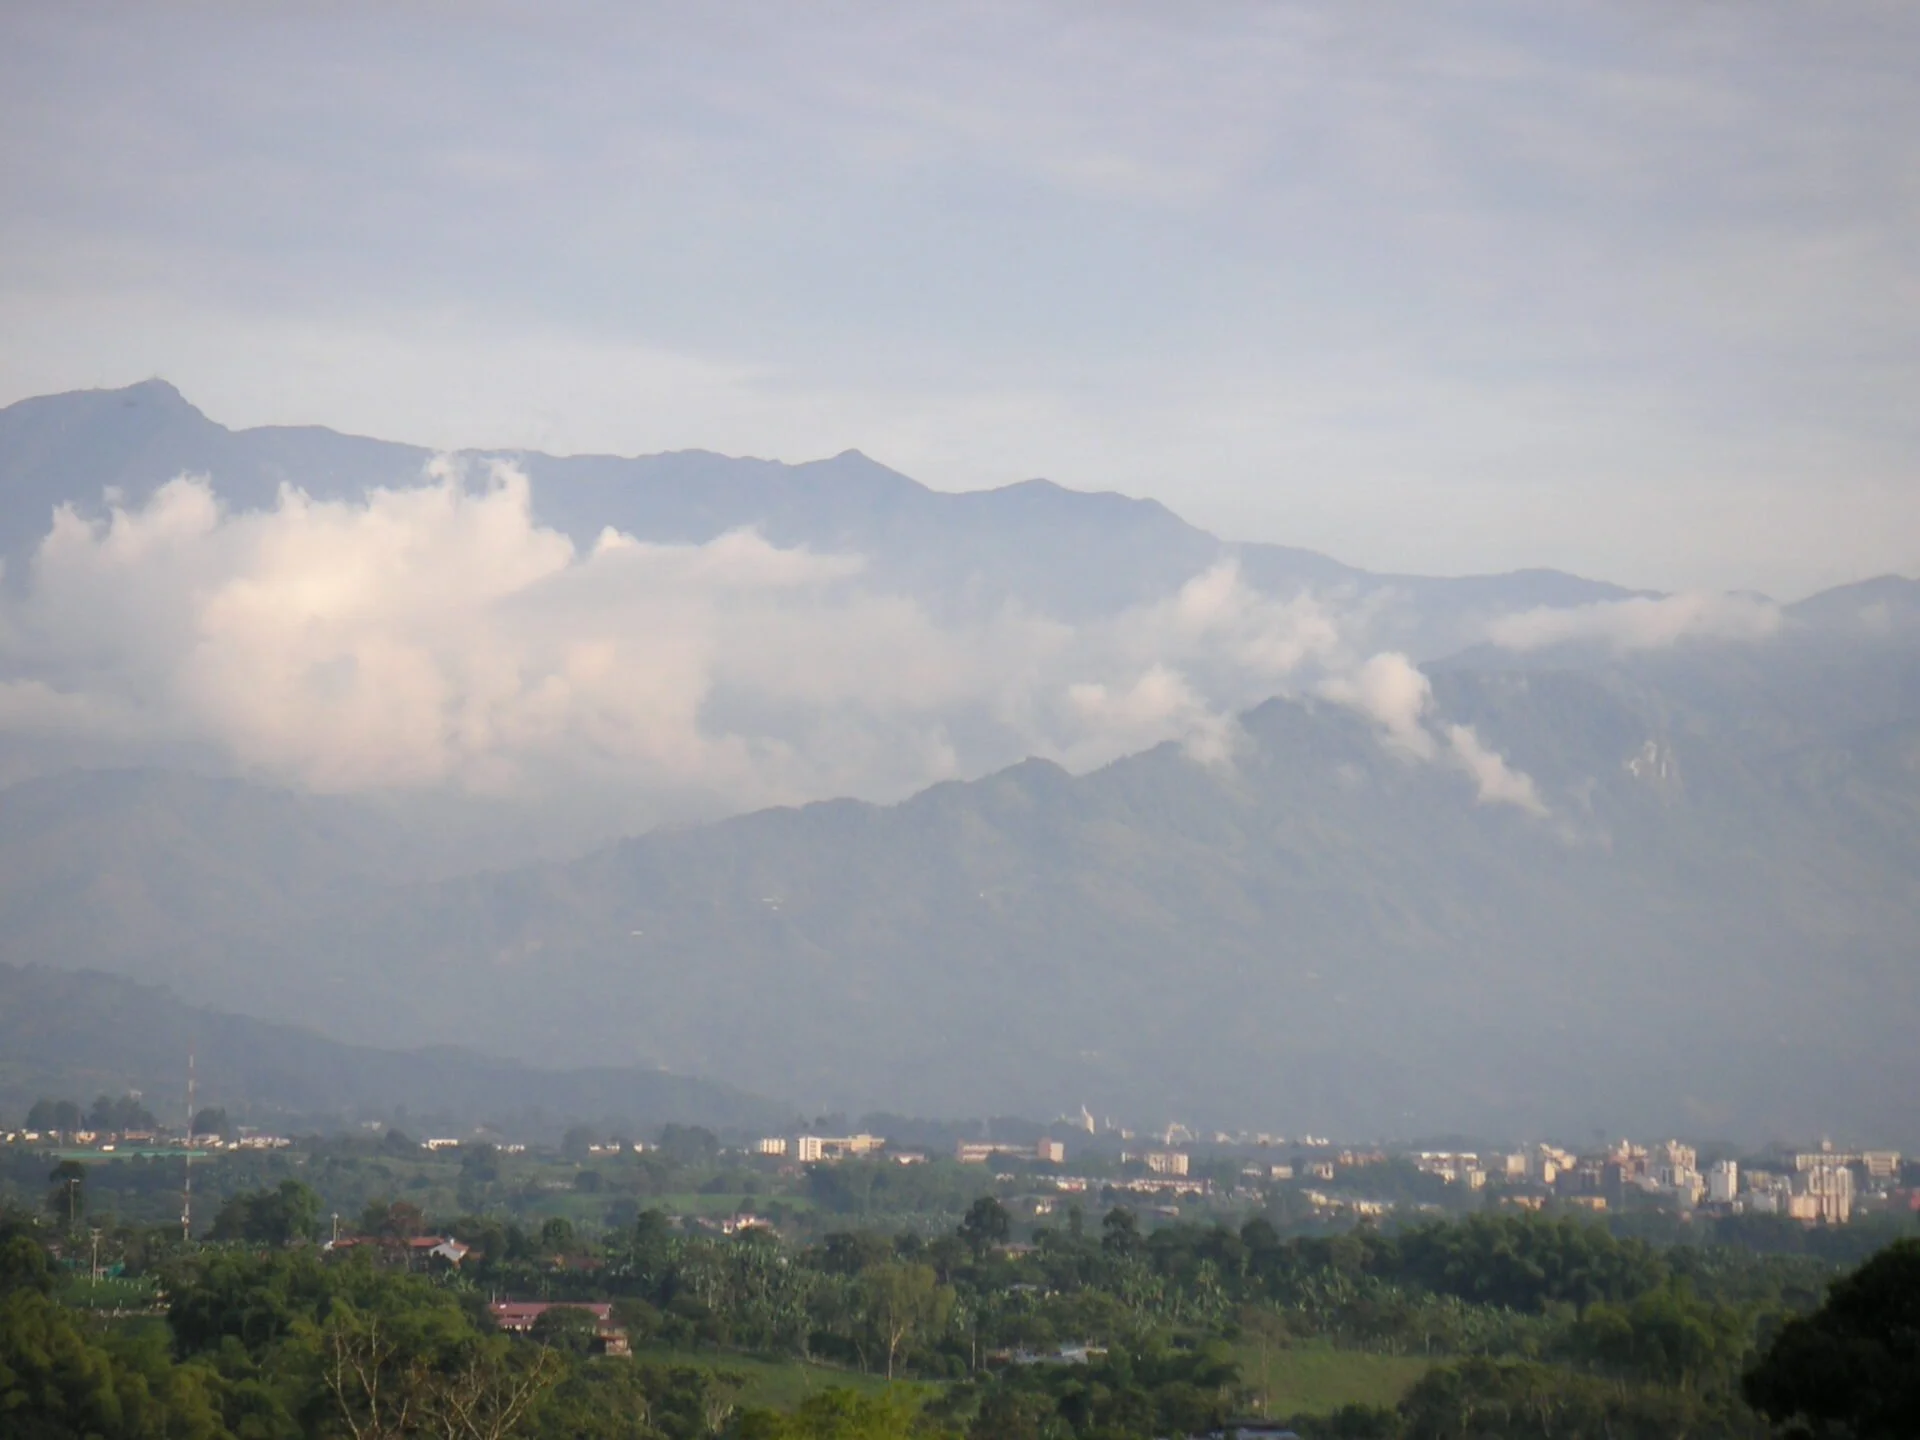 A landscape view of a town with buildings spread out amid greenery, nestled at the base of a mountain range with clouds partially covering the peaks.